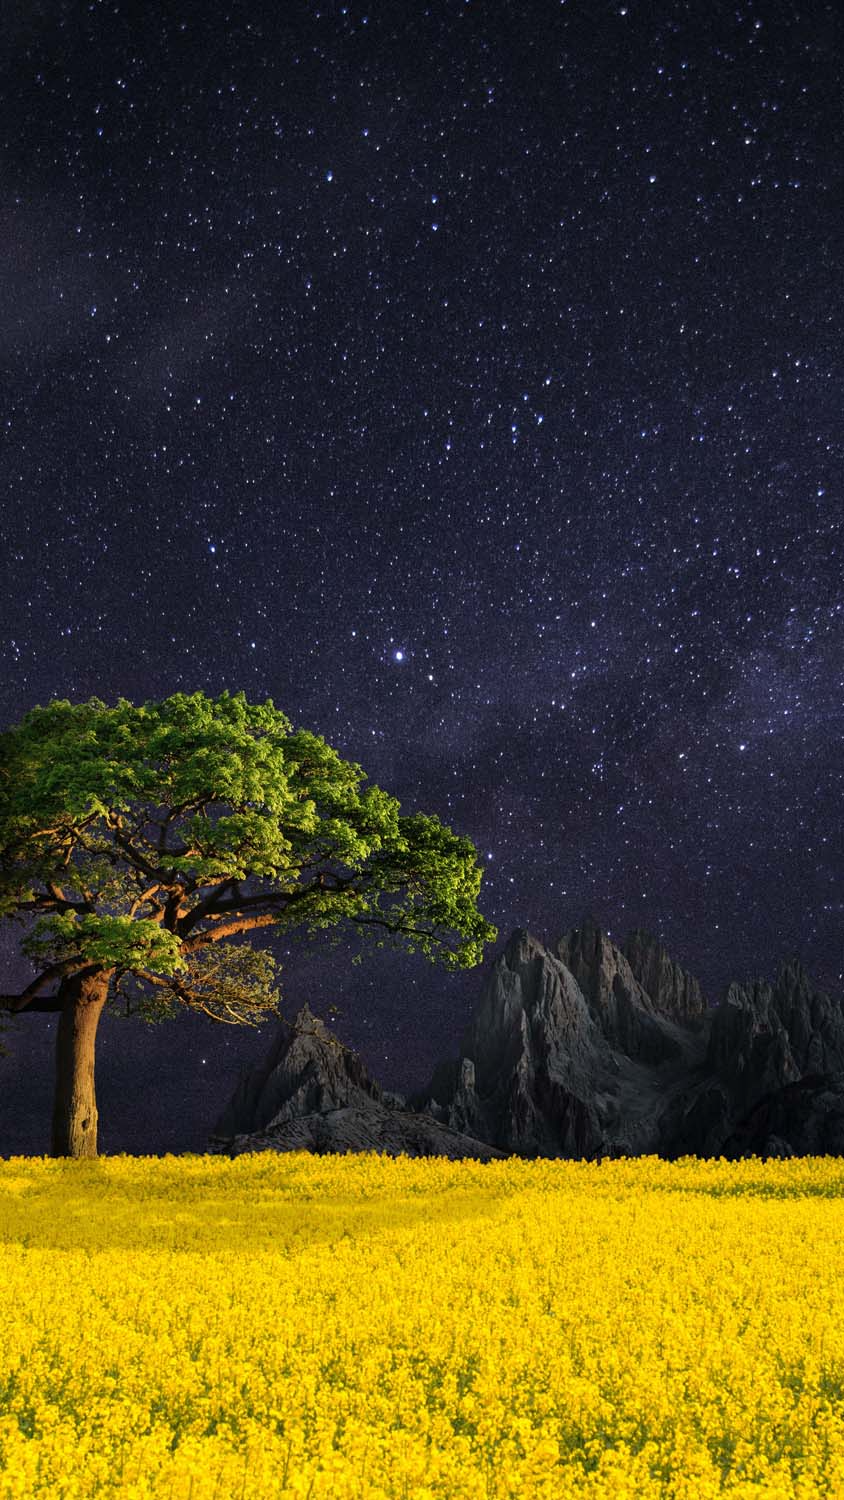 Night Nature Landscape IPhone Wallpaper HD  IPhone Wallpapers